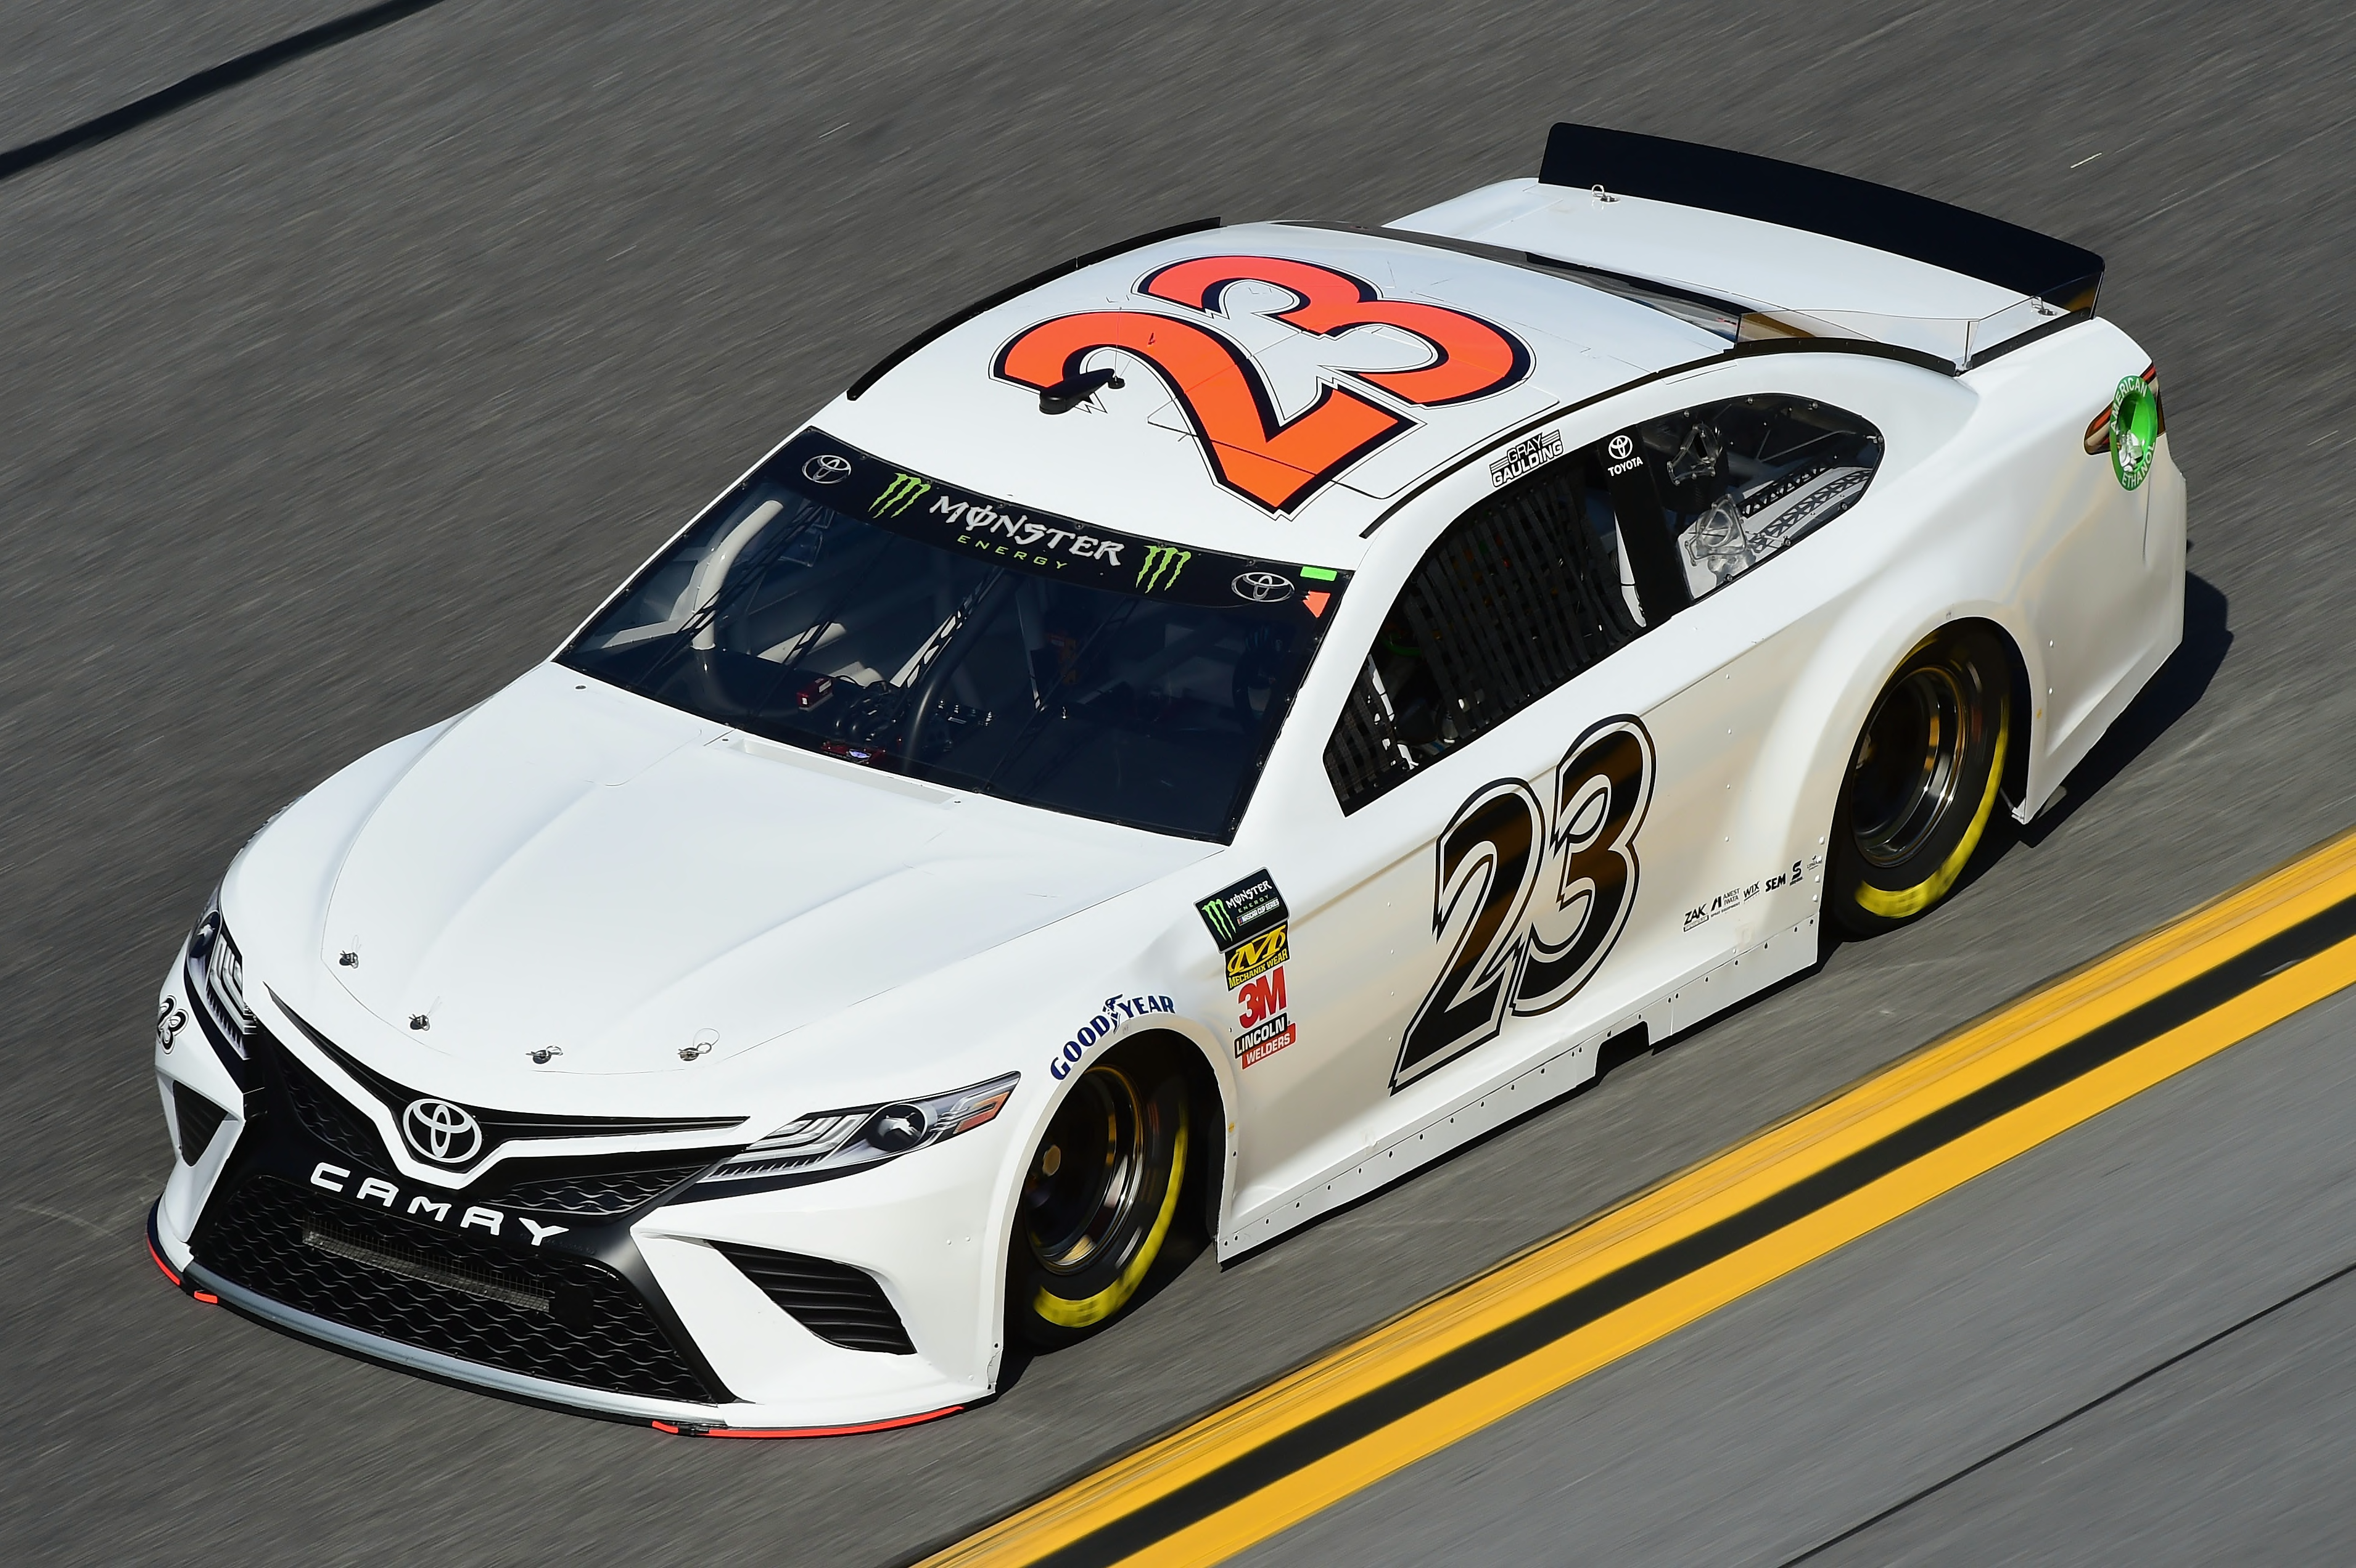 NASCAR Should underfunded teams such as BK Racing target young drivers?